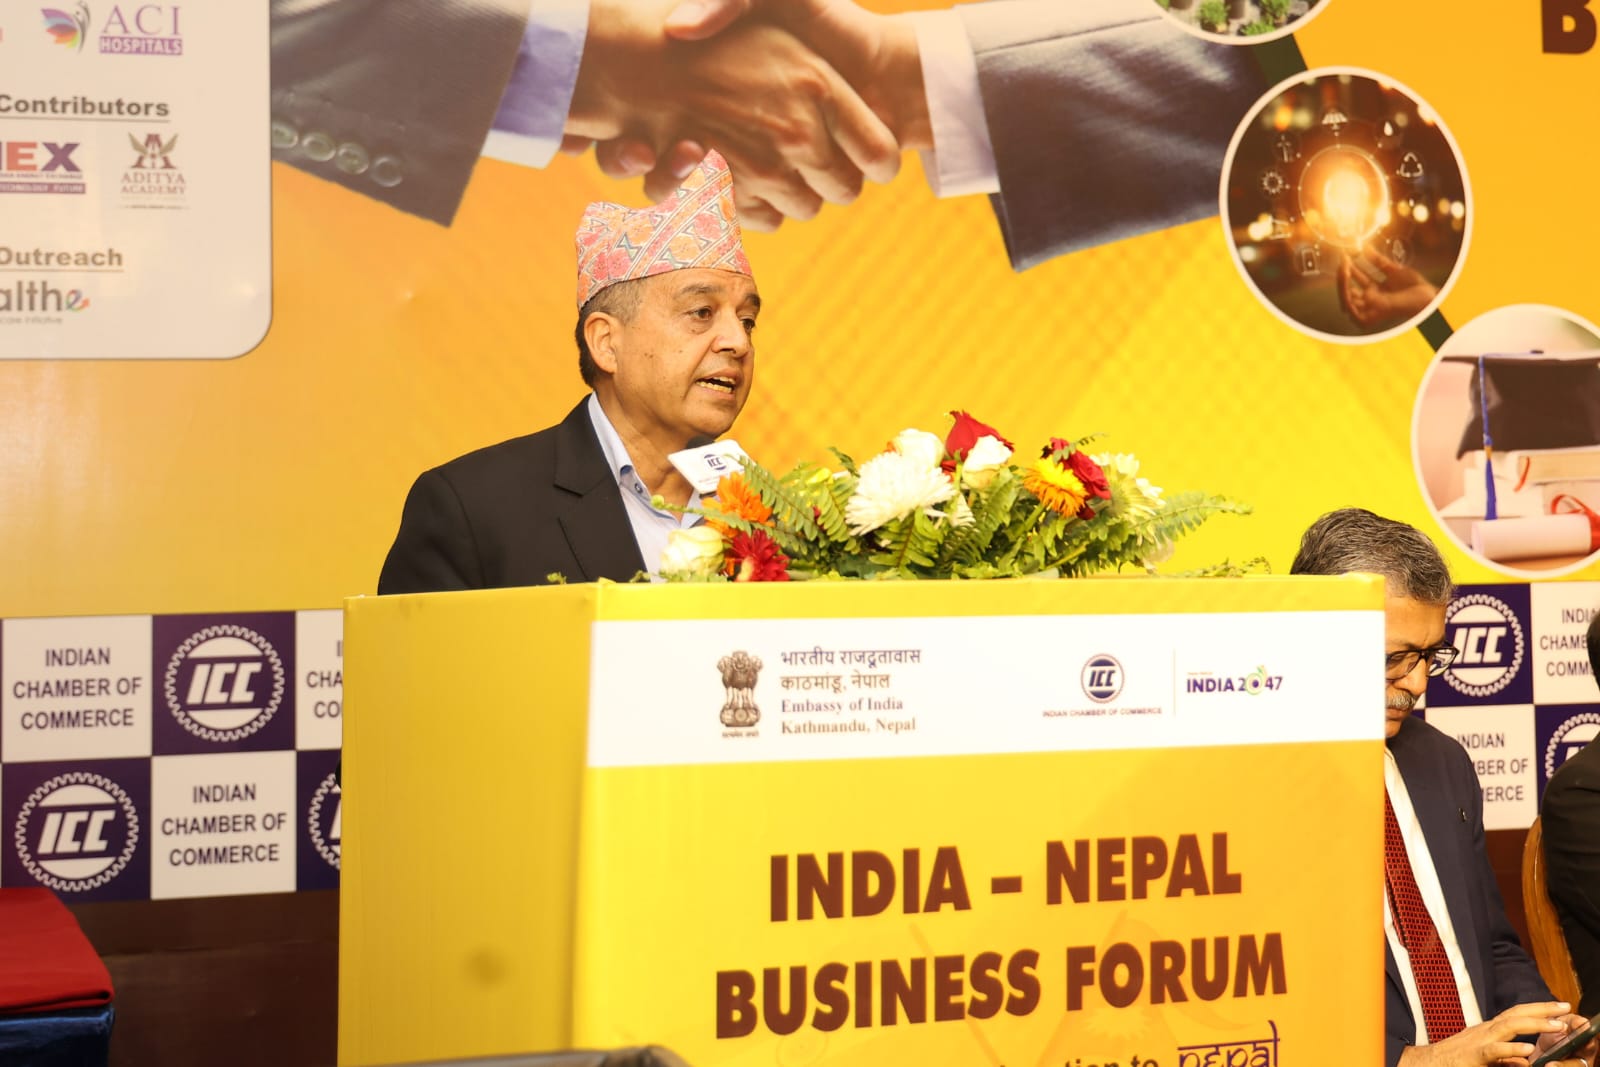 FNCCI President Dhakal urges indian investors to invest in Nepal’s booming hydel and tourism sectors